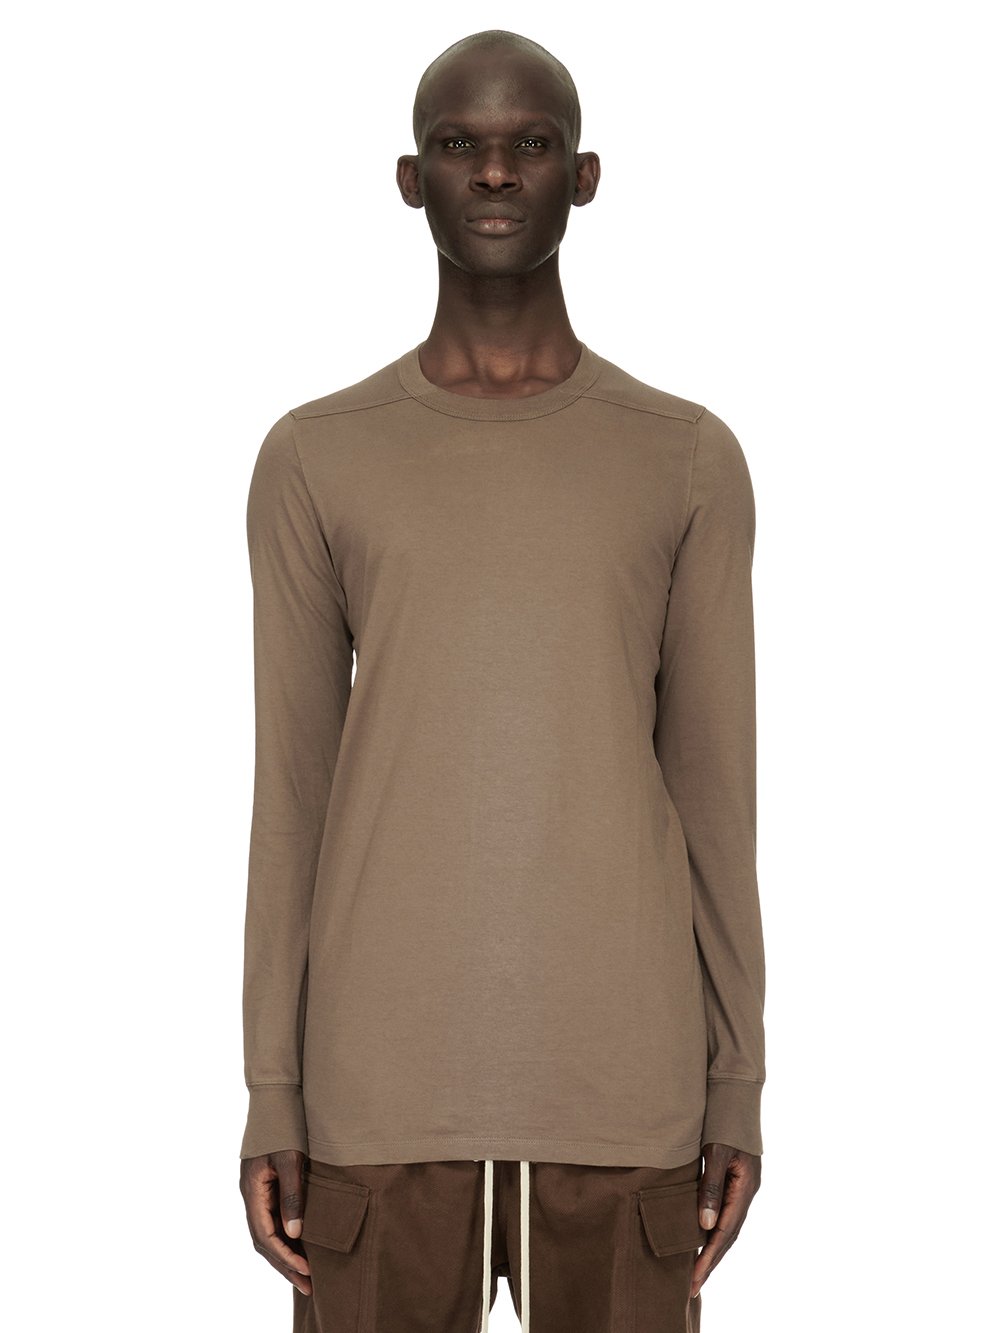 RICK OWENS FW23 LUXOR LEVEL LS T IN DUST CLASSIC COTTON JERSEY